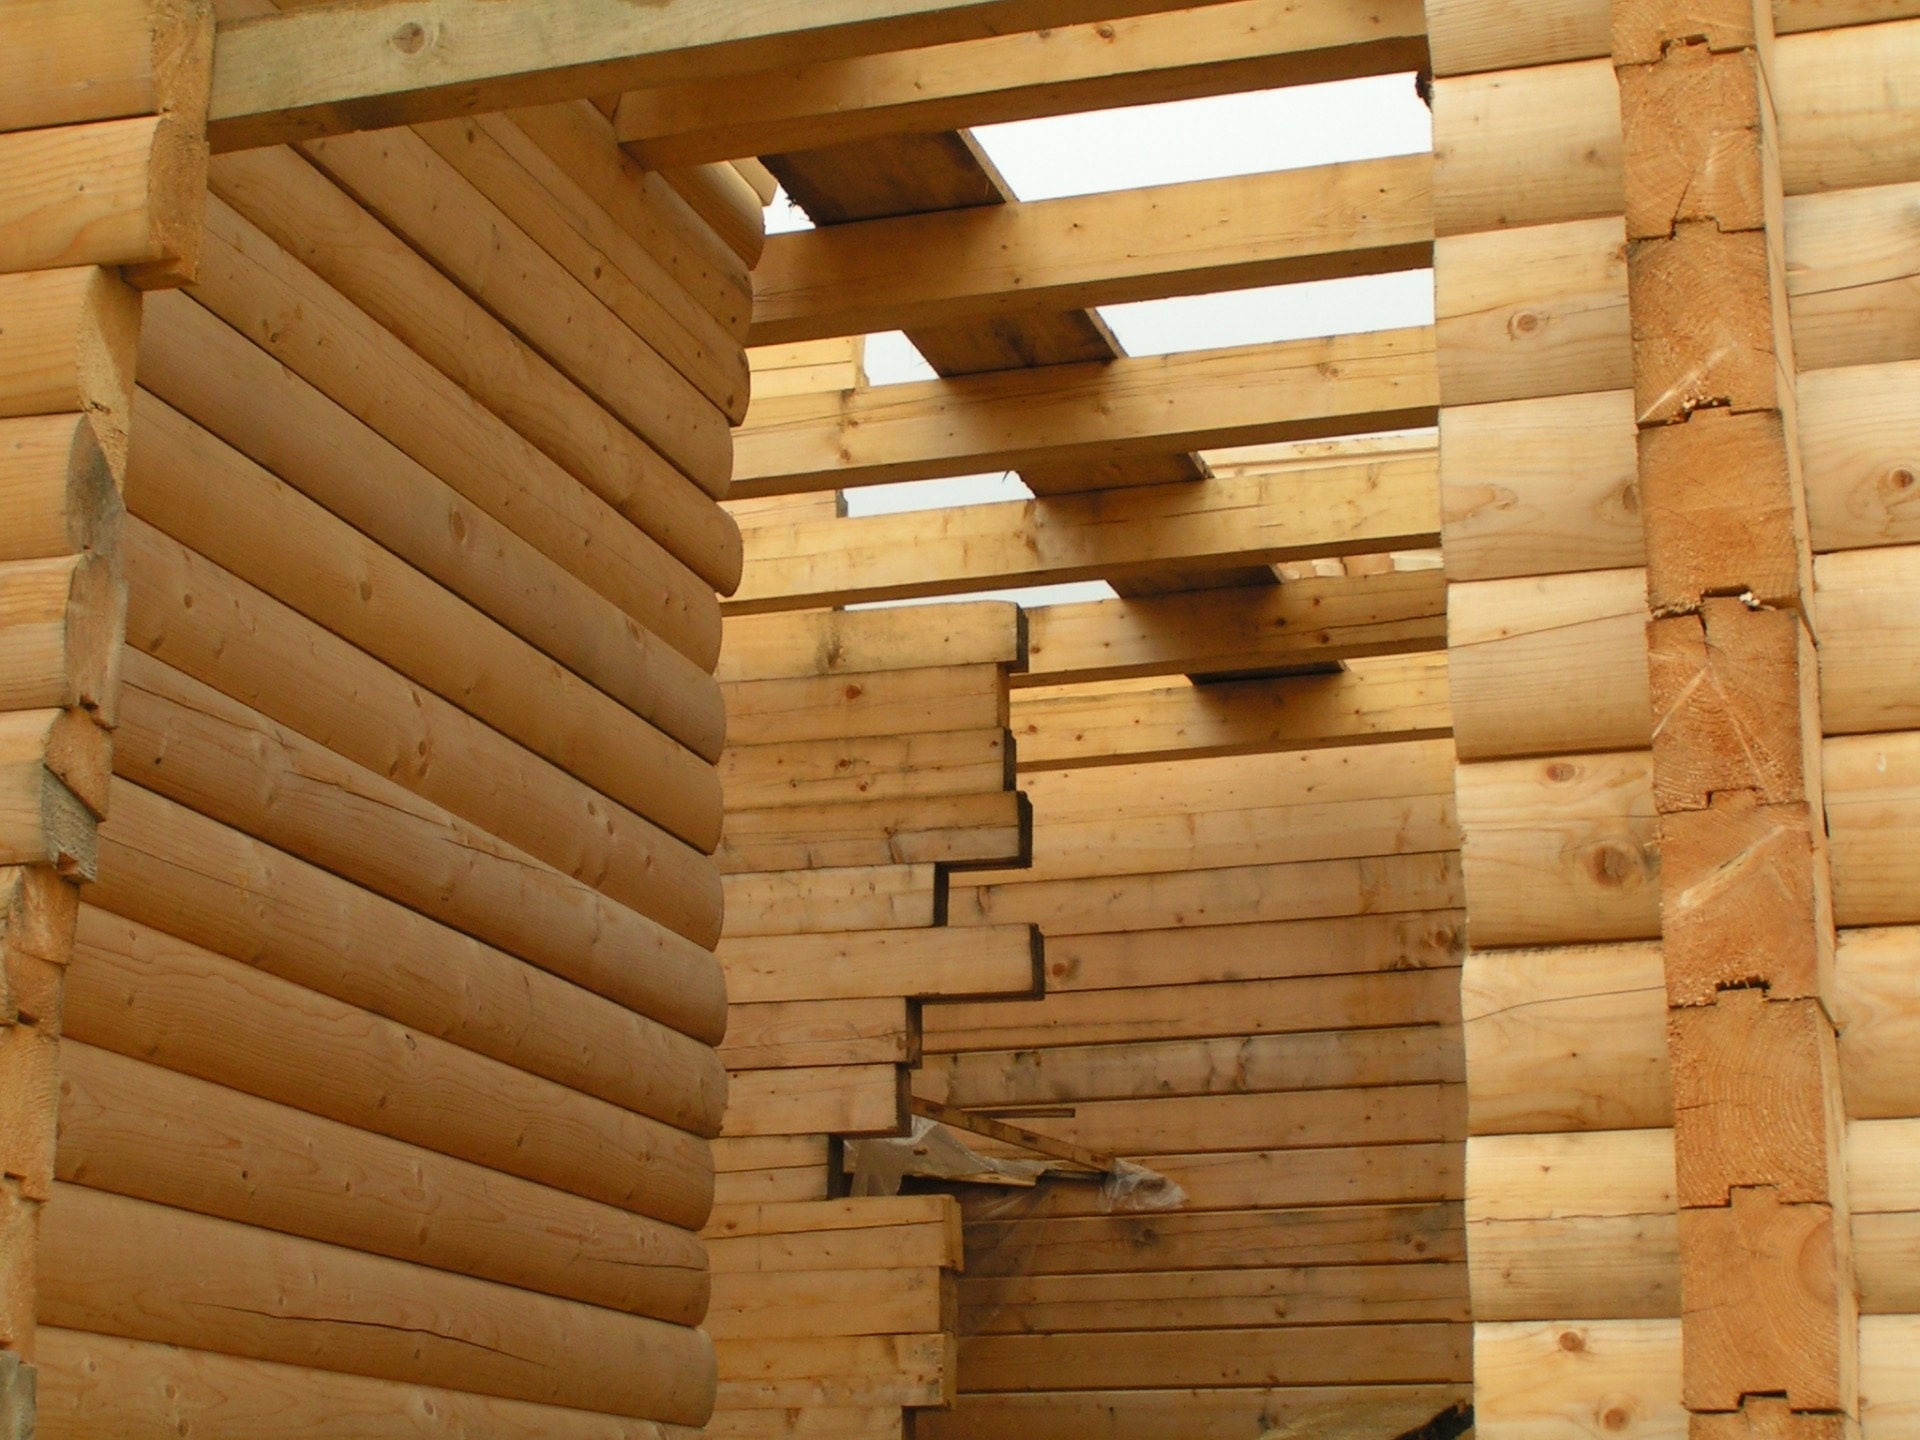 Light, Buildings, Wooden, Structures, wood - material, storage compartment